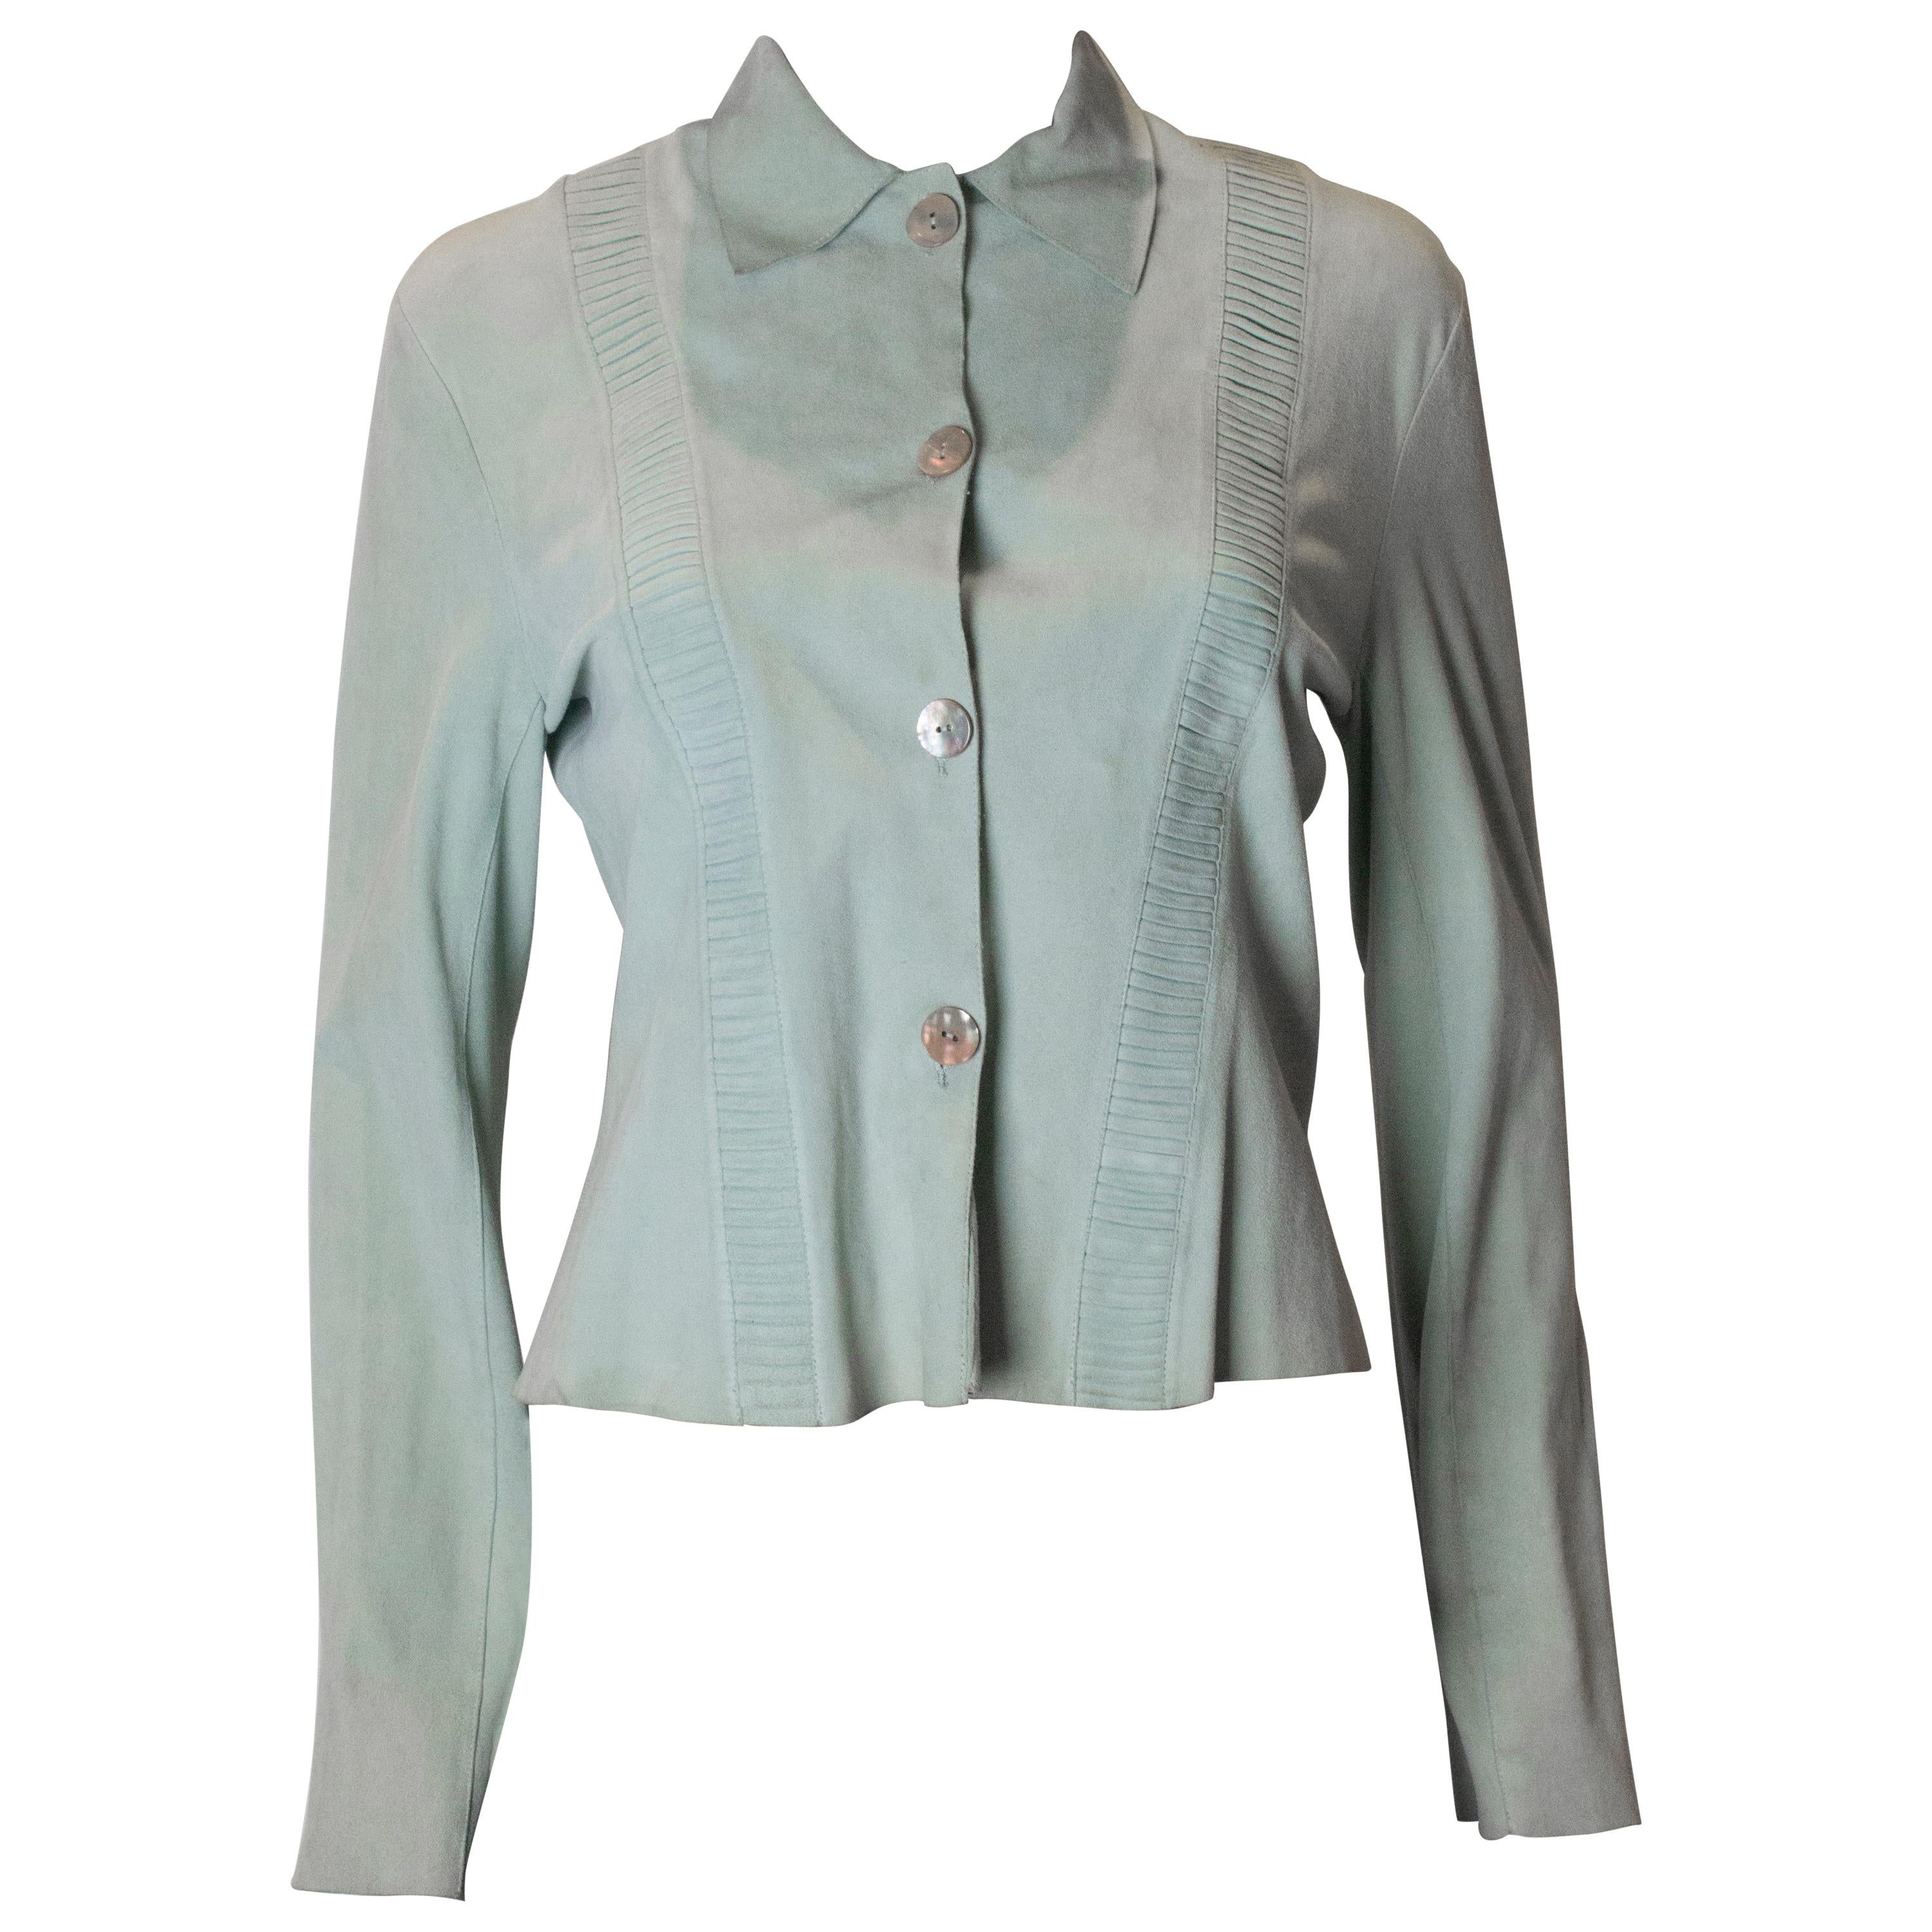 Vintage Peppermint Green Suede Shirt